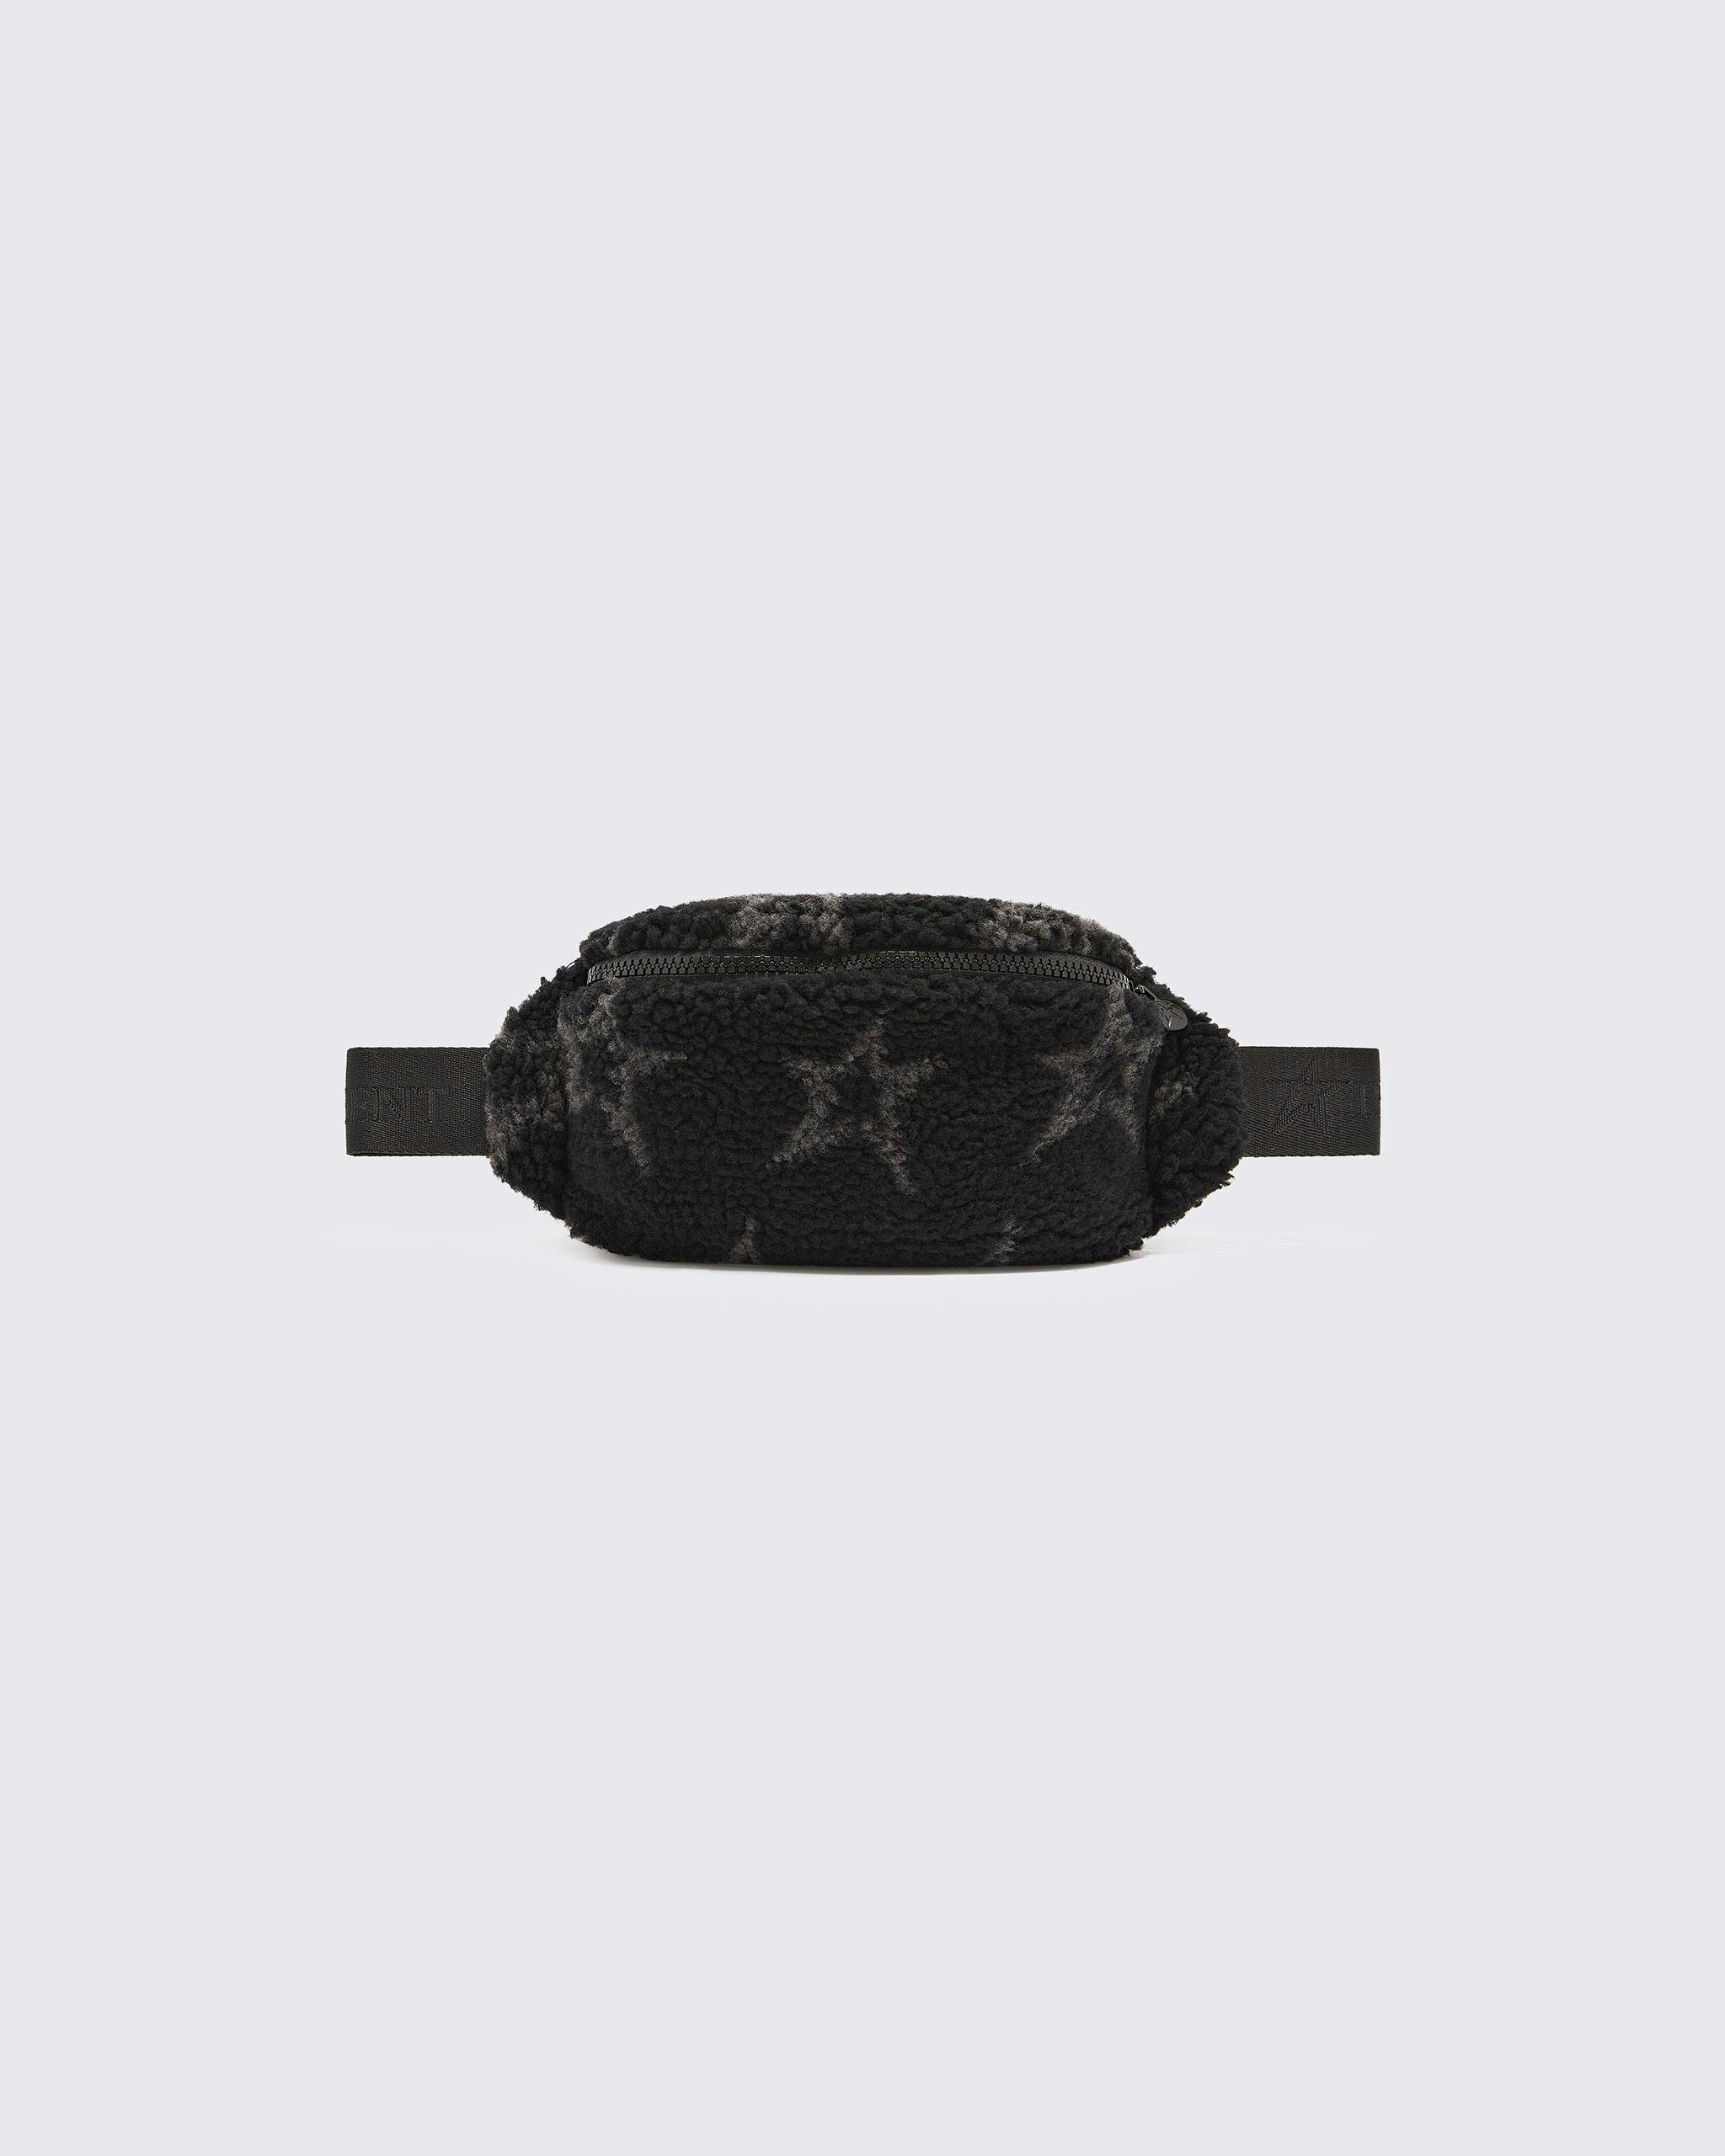 Perfect Moment Sherpa Waist Bag - Accessories